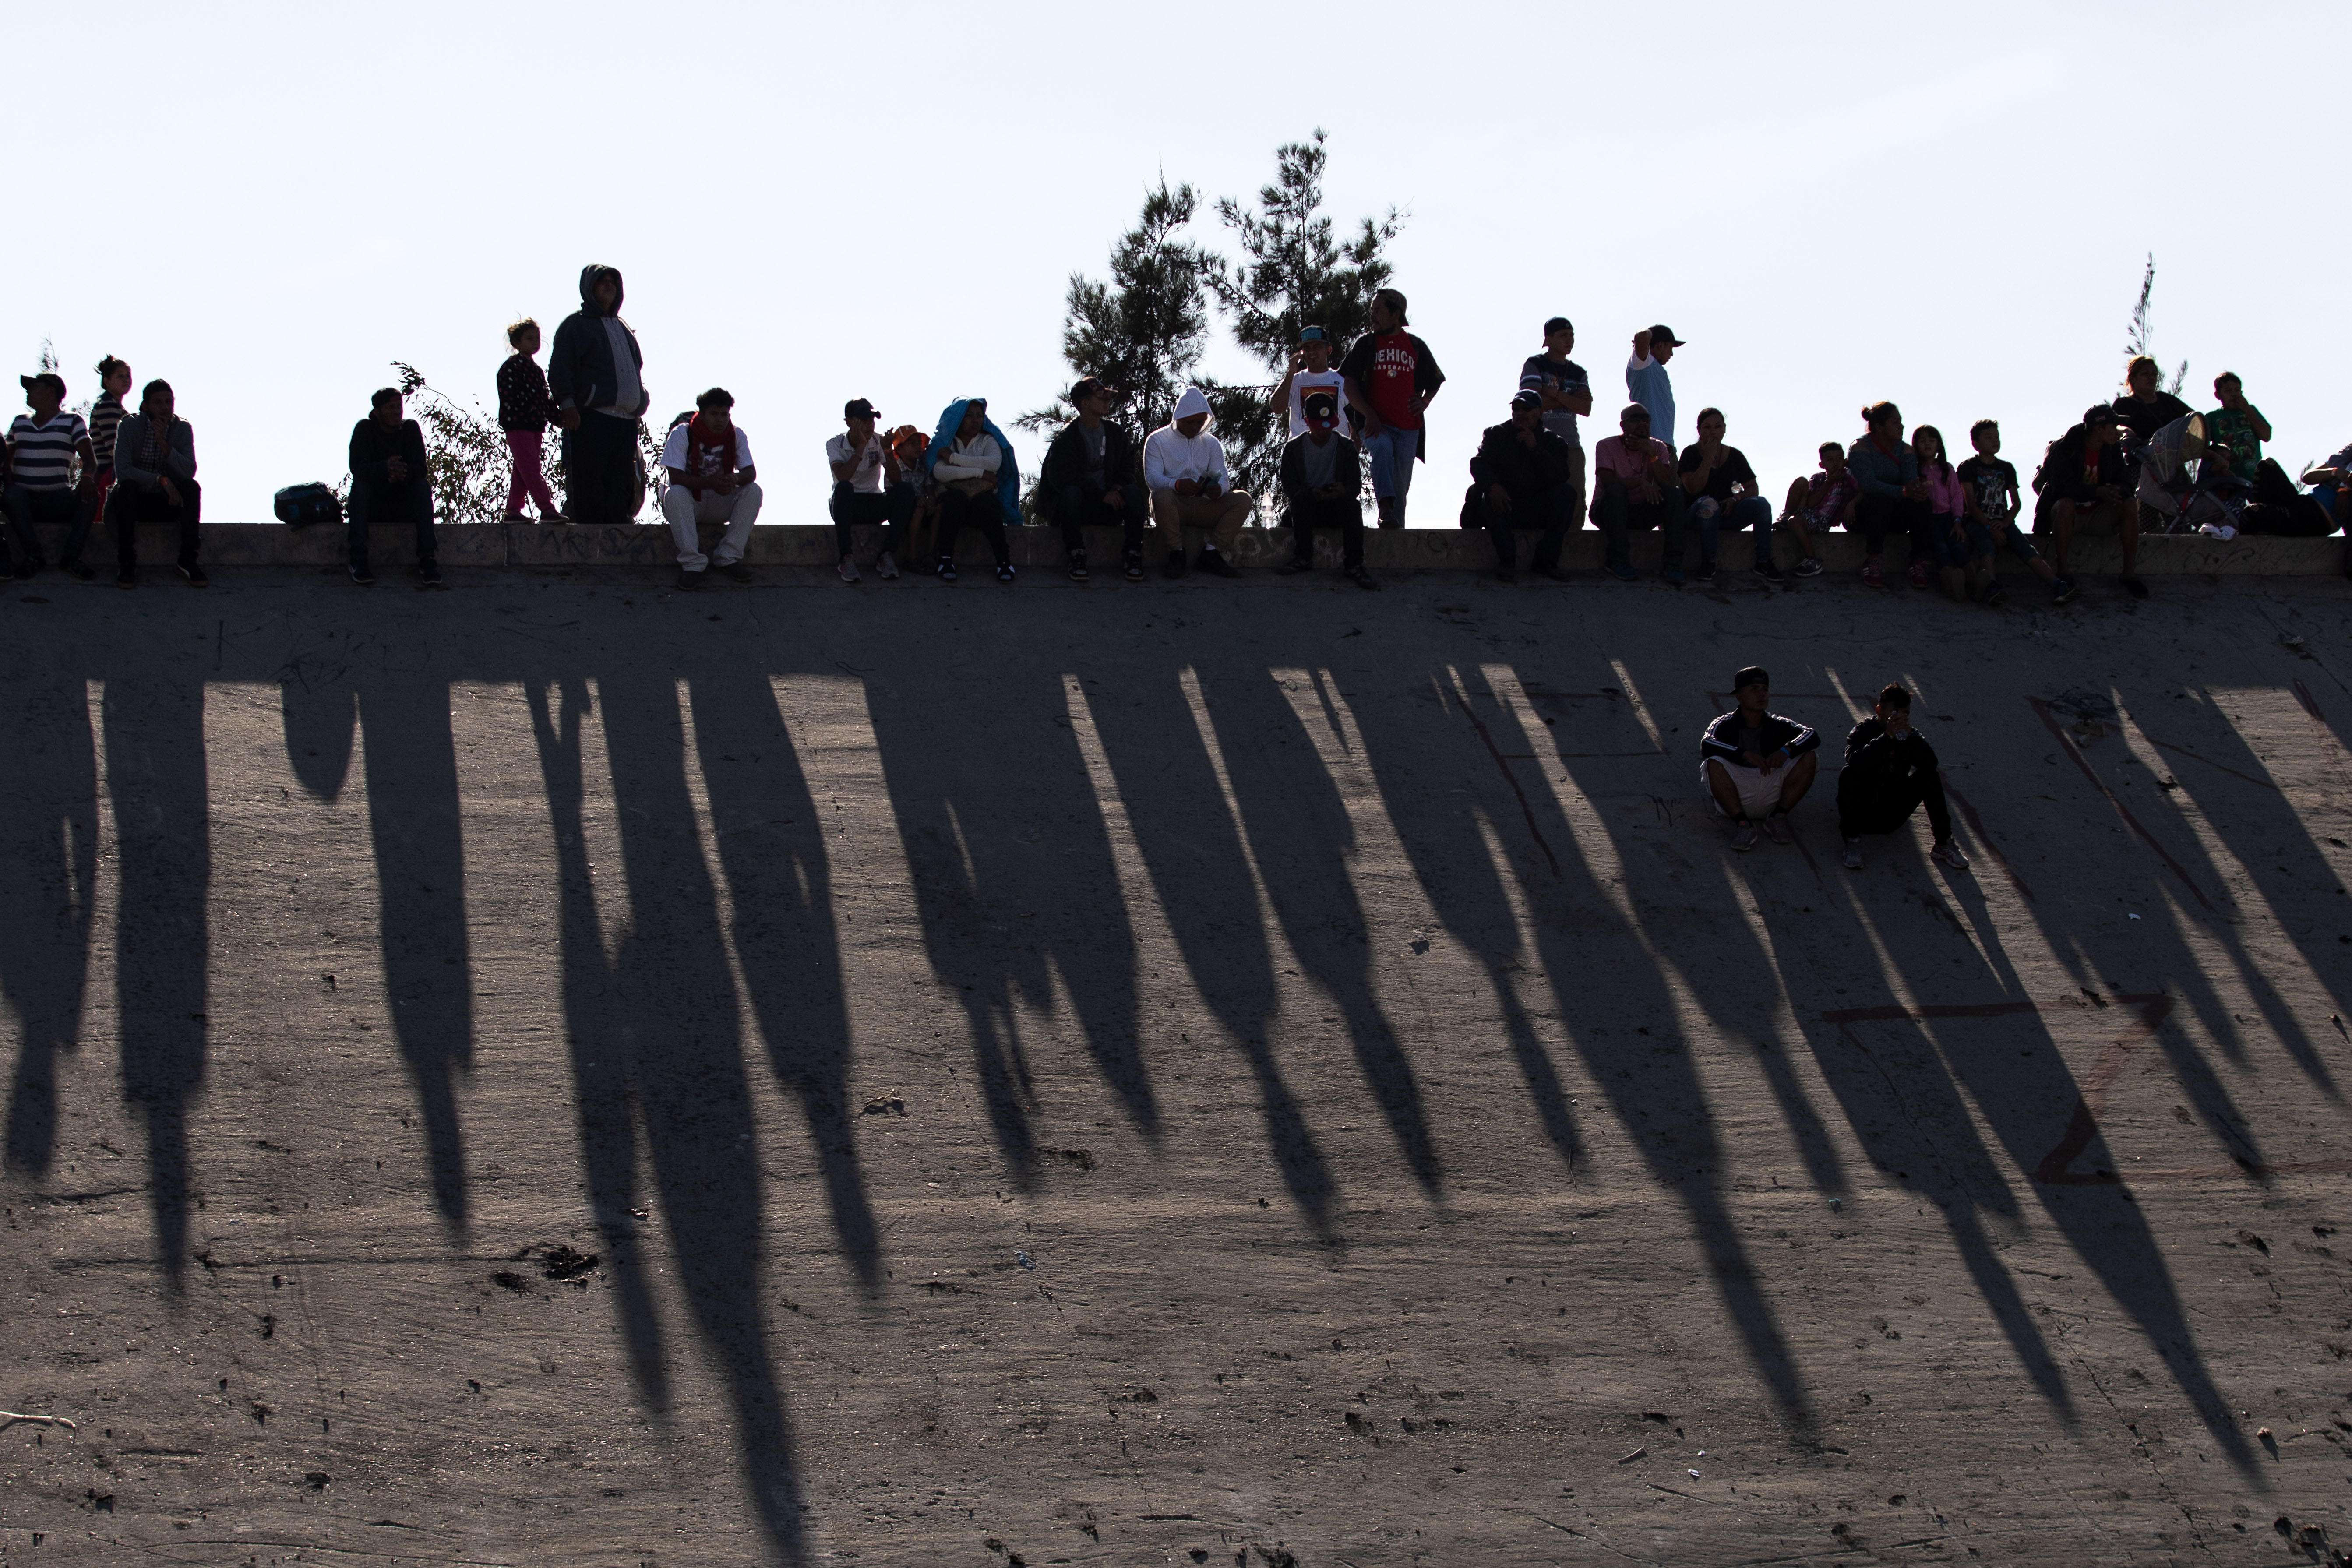  Central American migrants -mostly from Honduras- sit alonh the concrete waterway of the bordering Tijuana River right across the El Chaparral border crossing point in Tijuana, Baja California State, Mexico, on November 25, 2018. - US officials closed the San Ysidro crossing point in southern California on Sunday after hundreds of migrants, part of the 'caravan' condemned by President Donald Trump, tried to breach a fence from Tijuana, authorities announced. (Photo by GUILLERMO ARIAS / AFP)